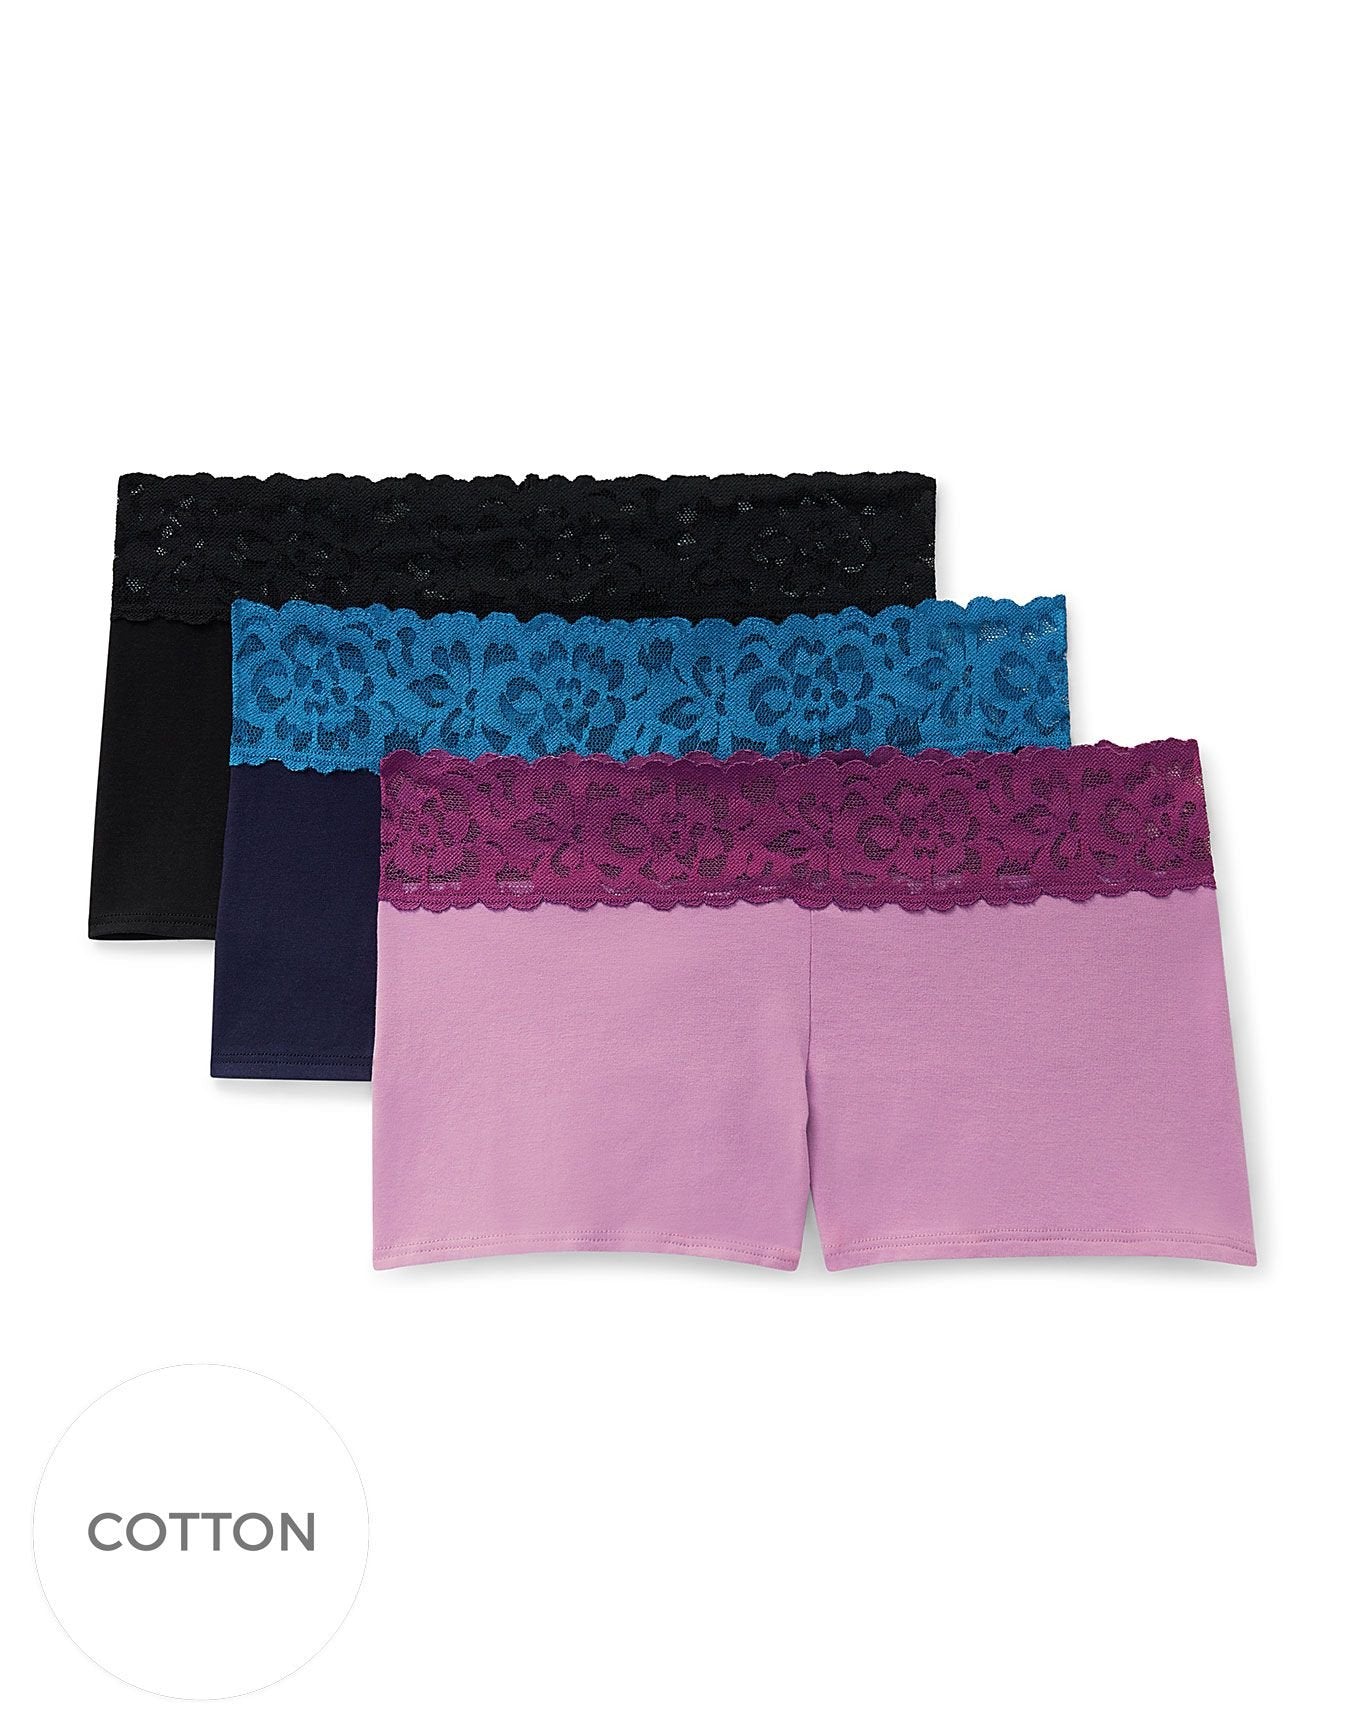 Adore Me Leondra Cotton Pack Shortie Panties (Pack of 3) in color Multi- BBP and shape shortie